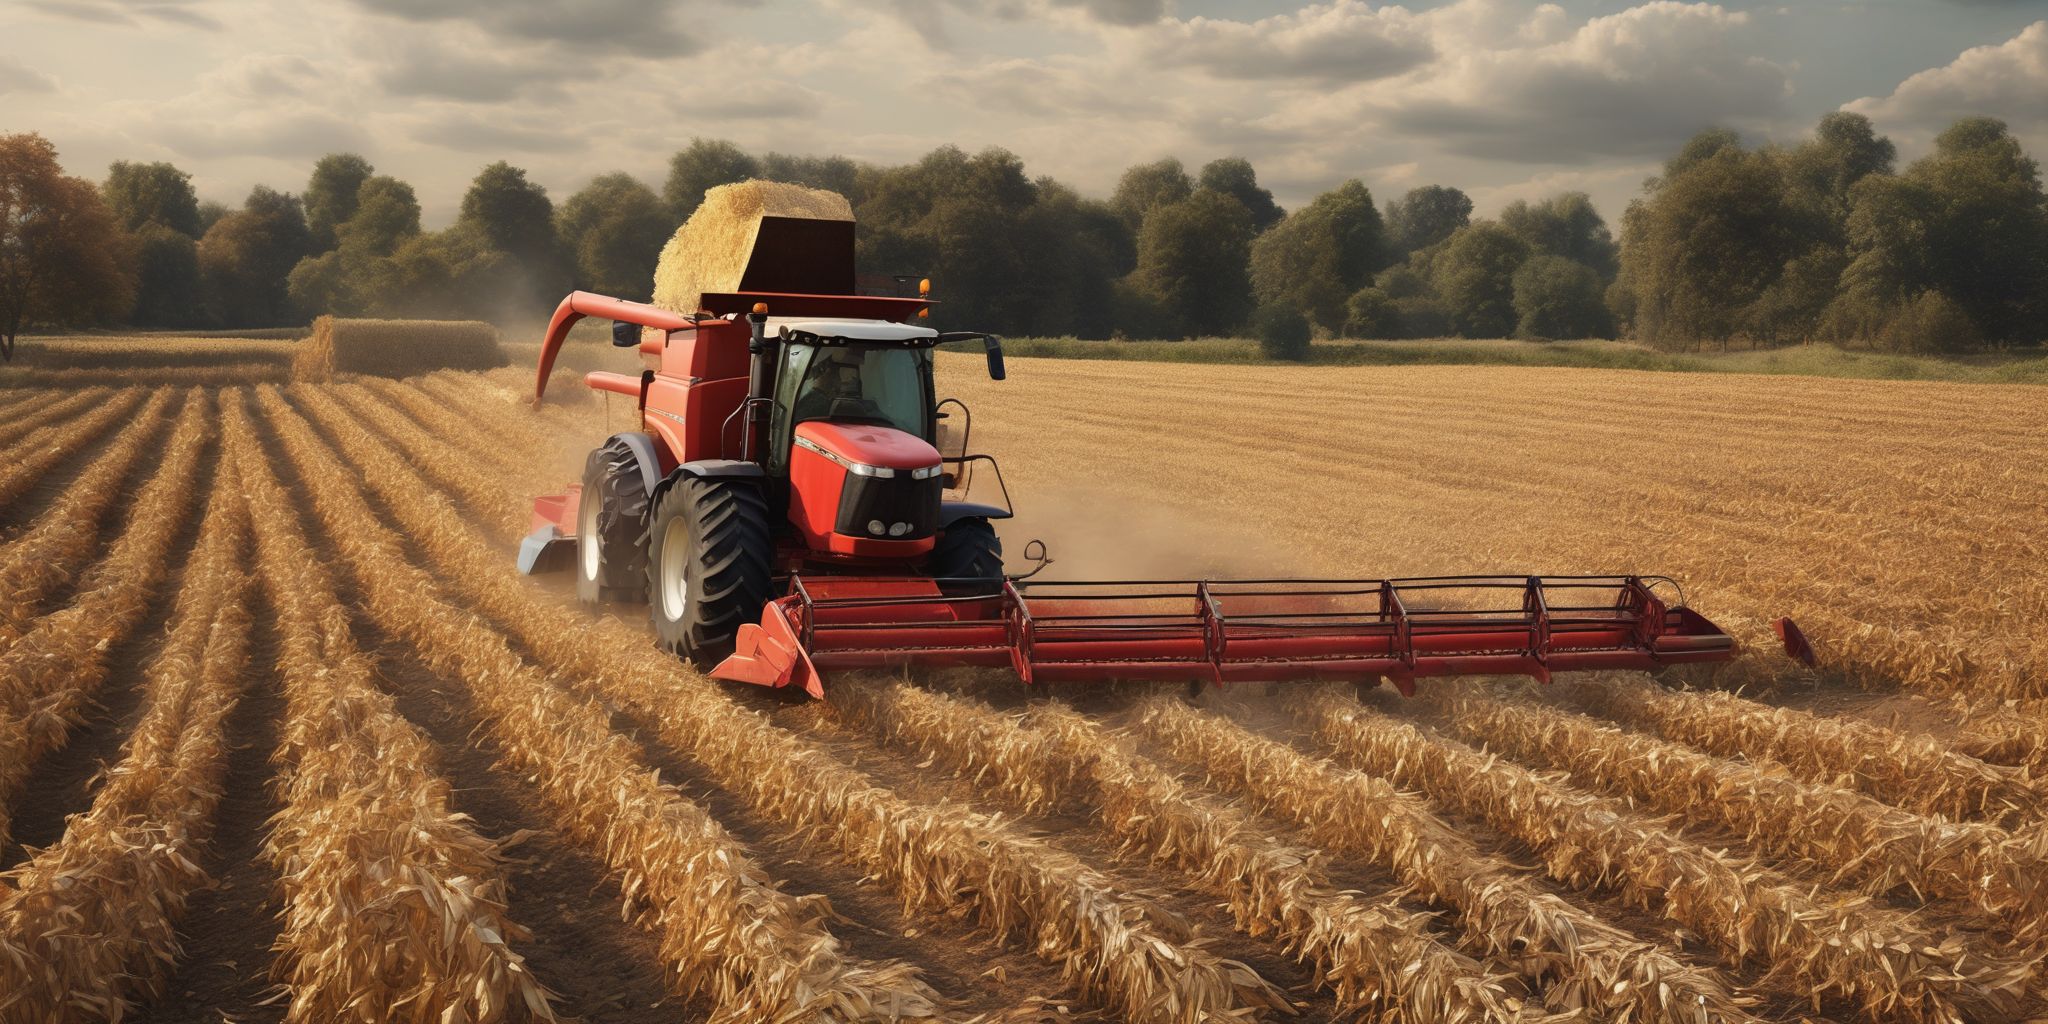 Harvest  in realistic, photographic style